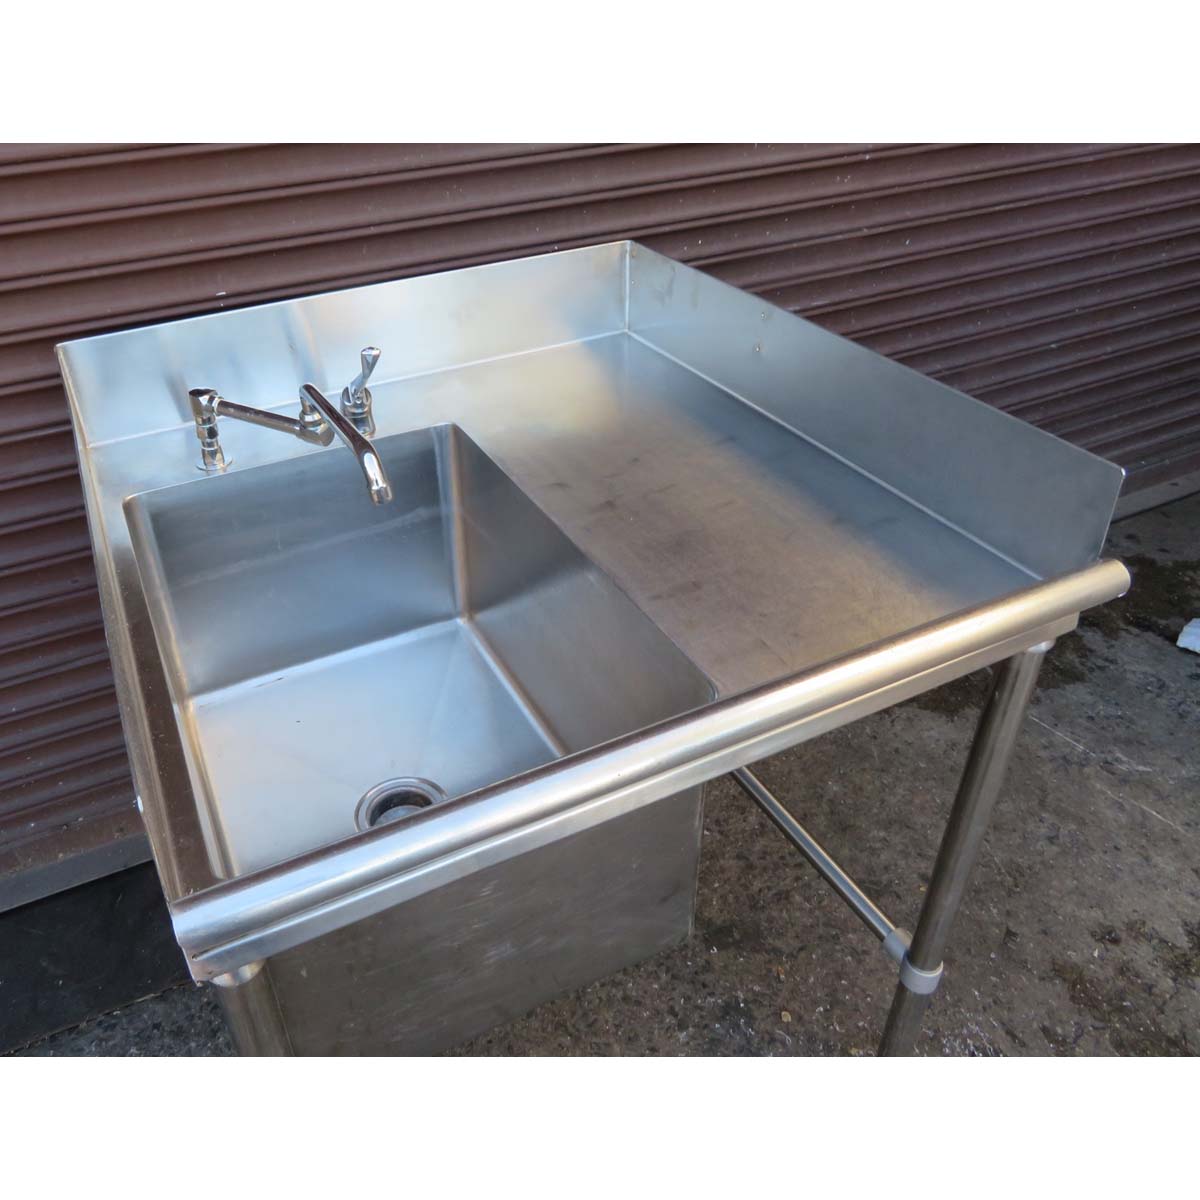 Custom-125 Sink 34"W x 36"D x 37"H, Used Good Condition image 1